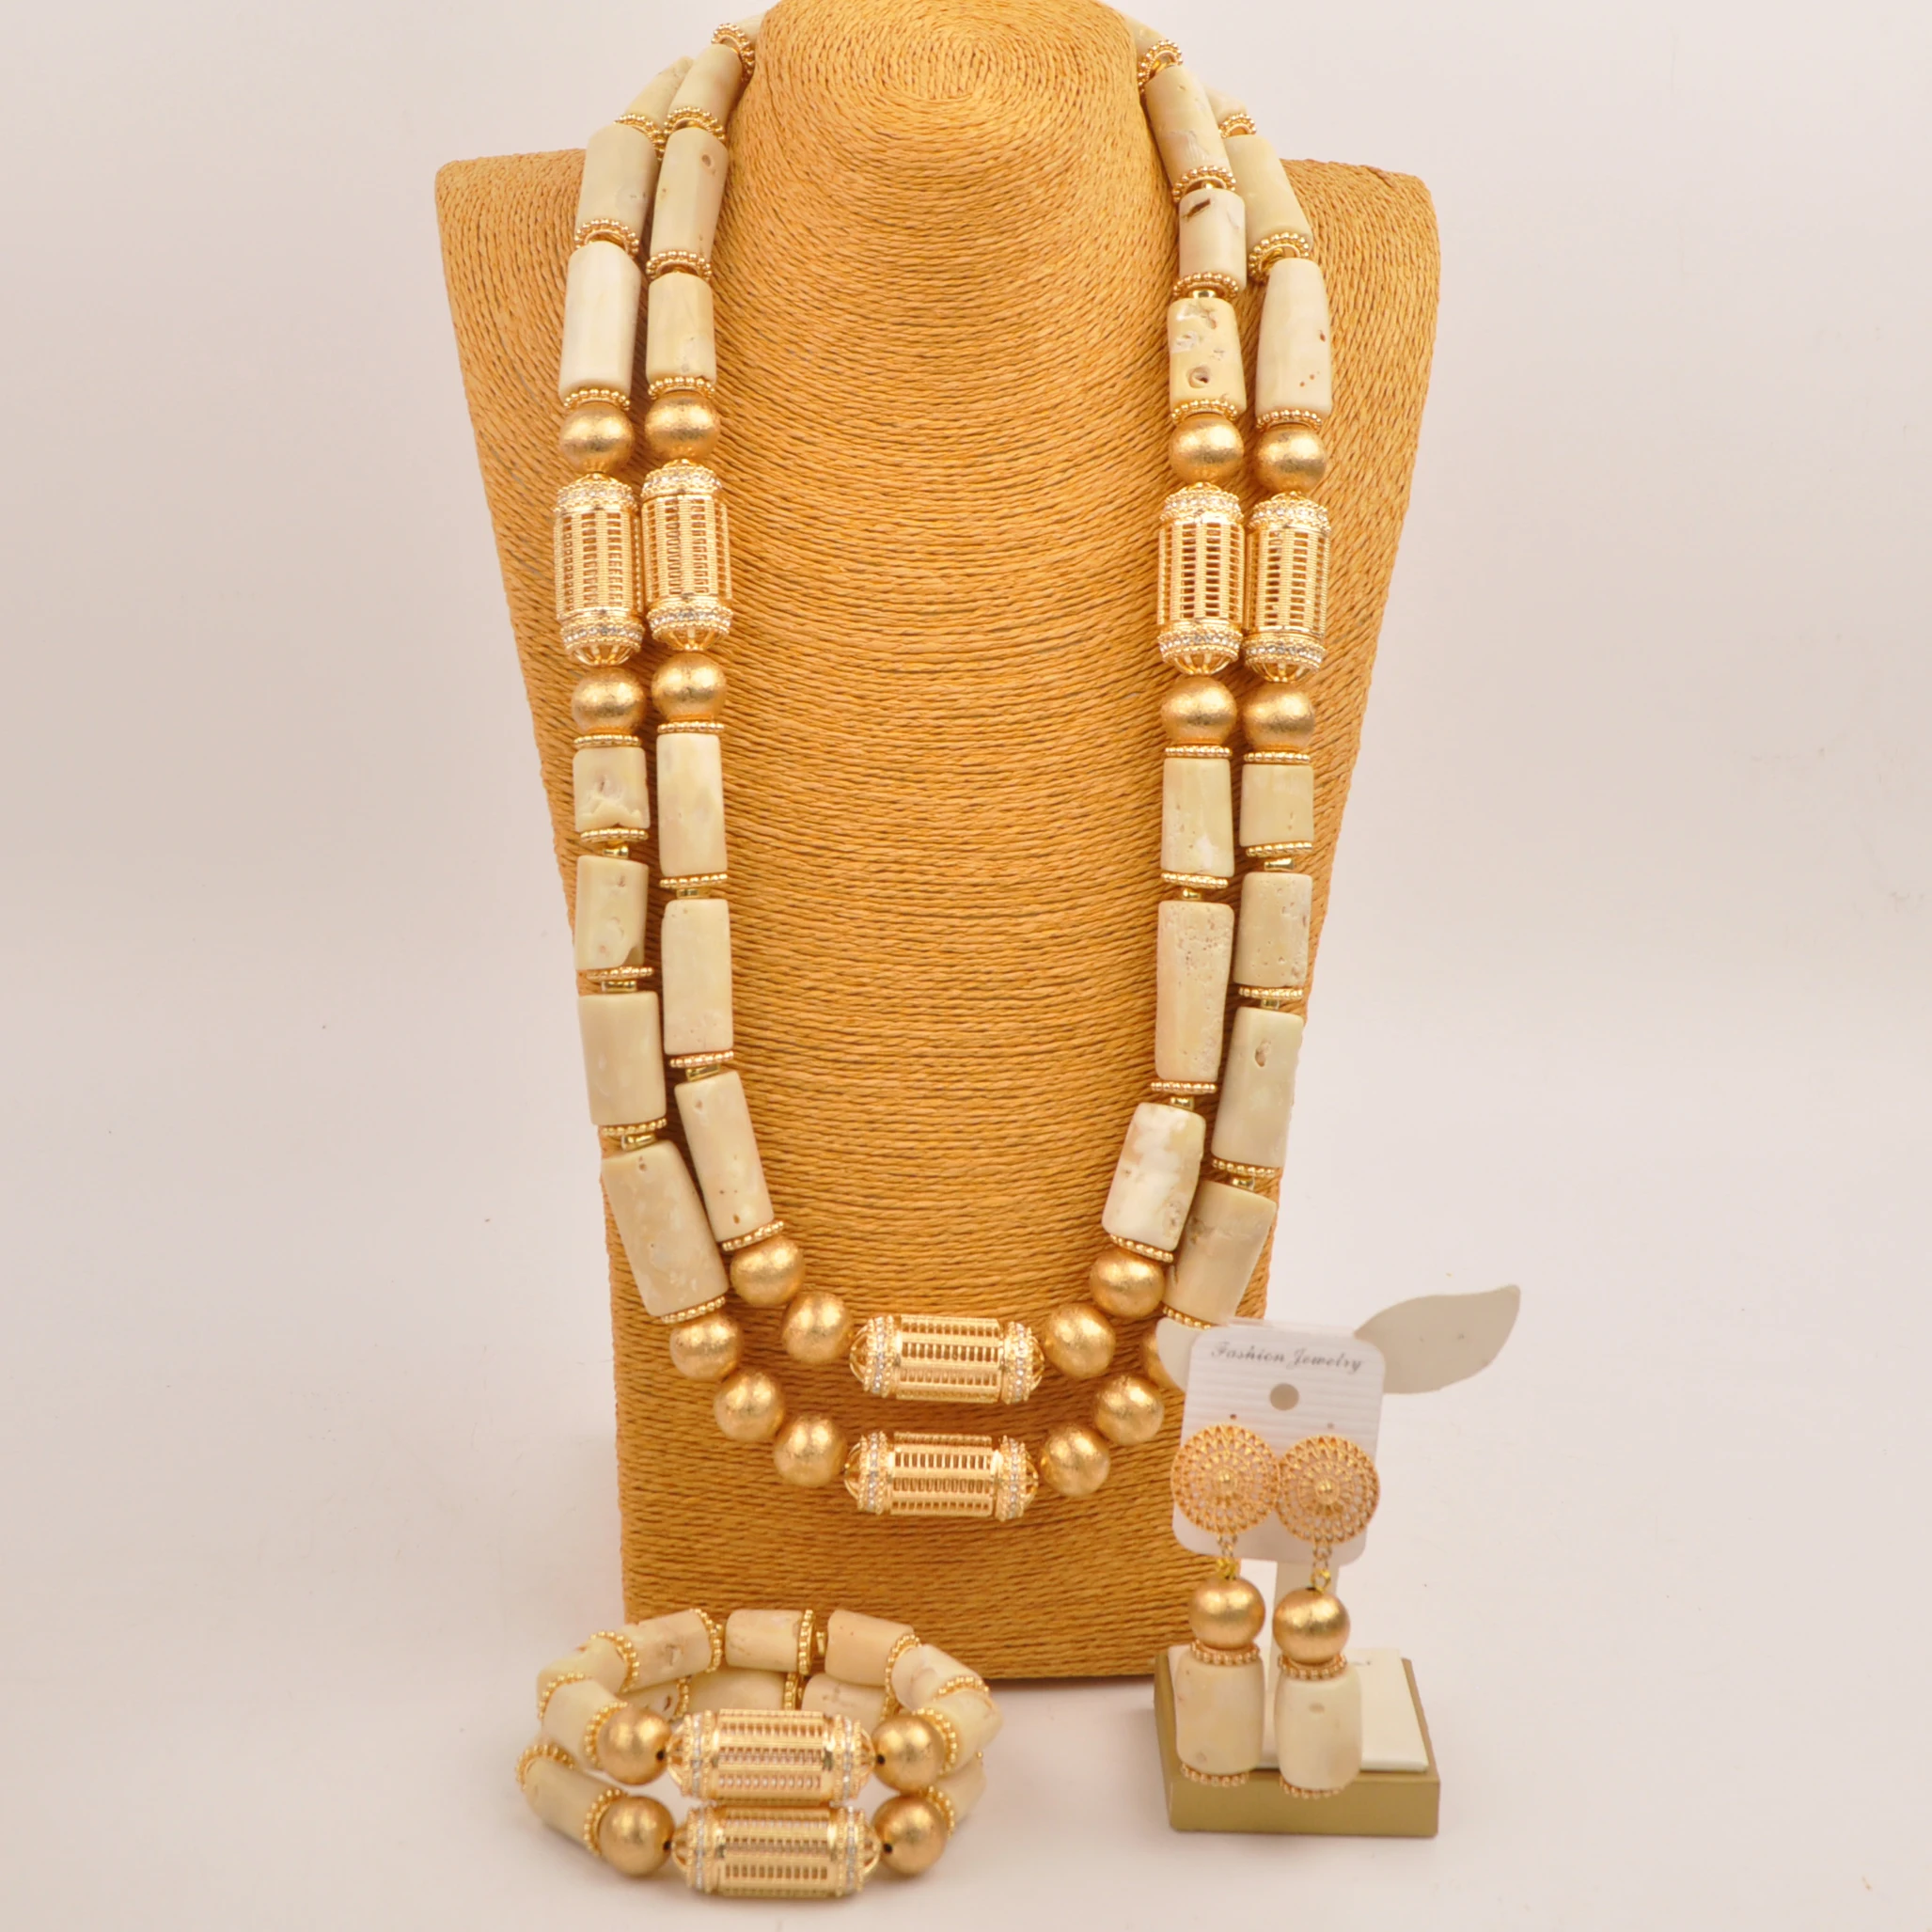 

Nigerian Bride Wedding Necklace 32inches 2Layers White Coral Bead Bridal Jewelry Set